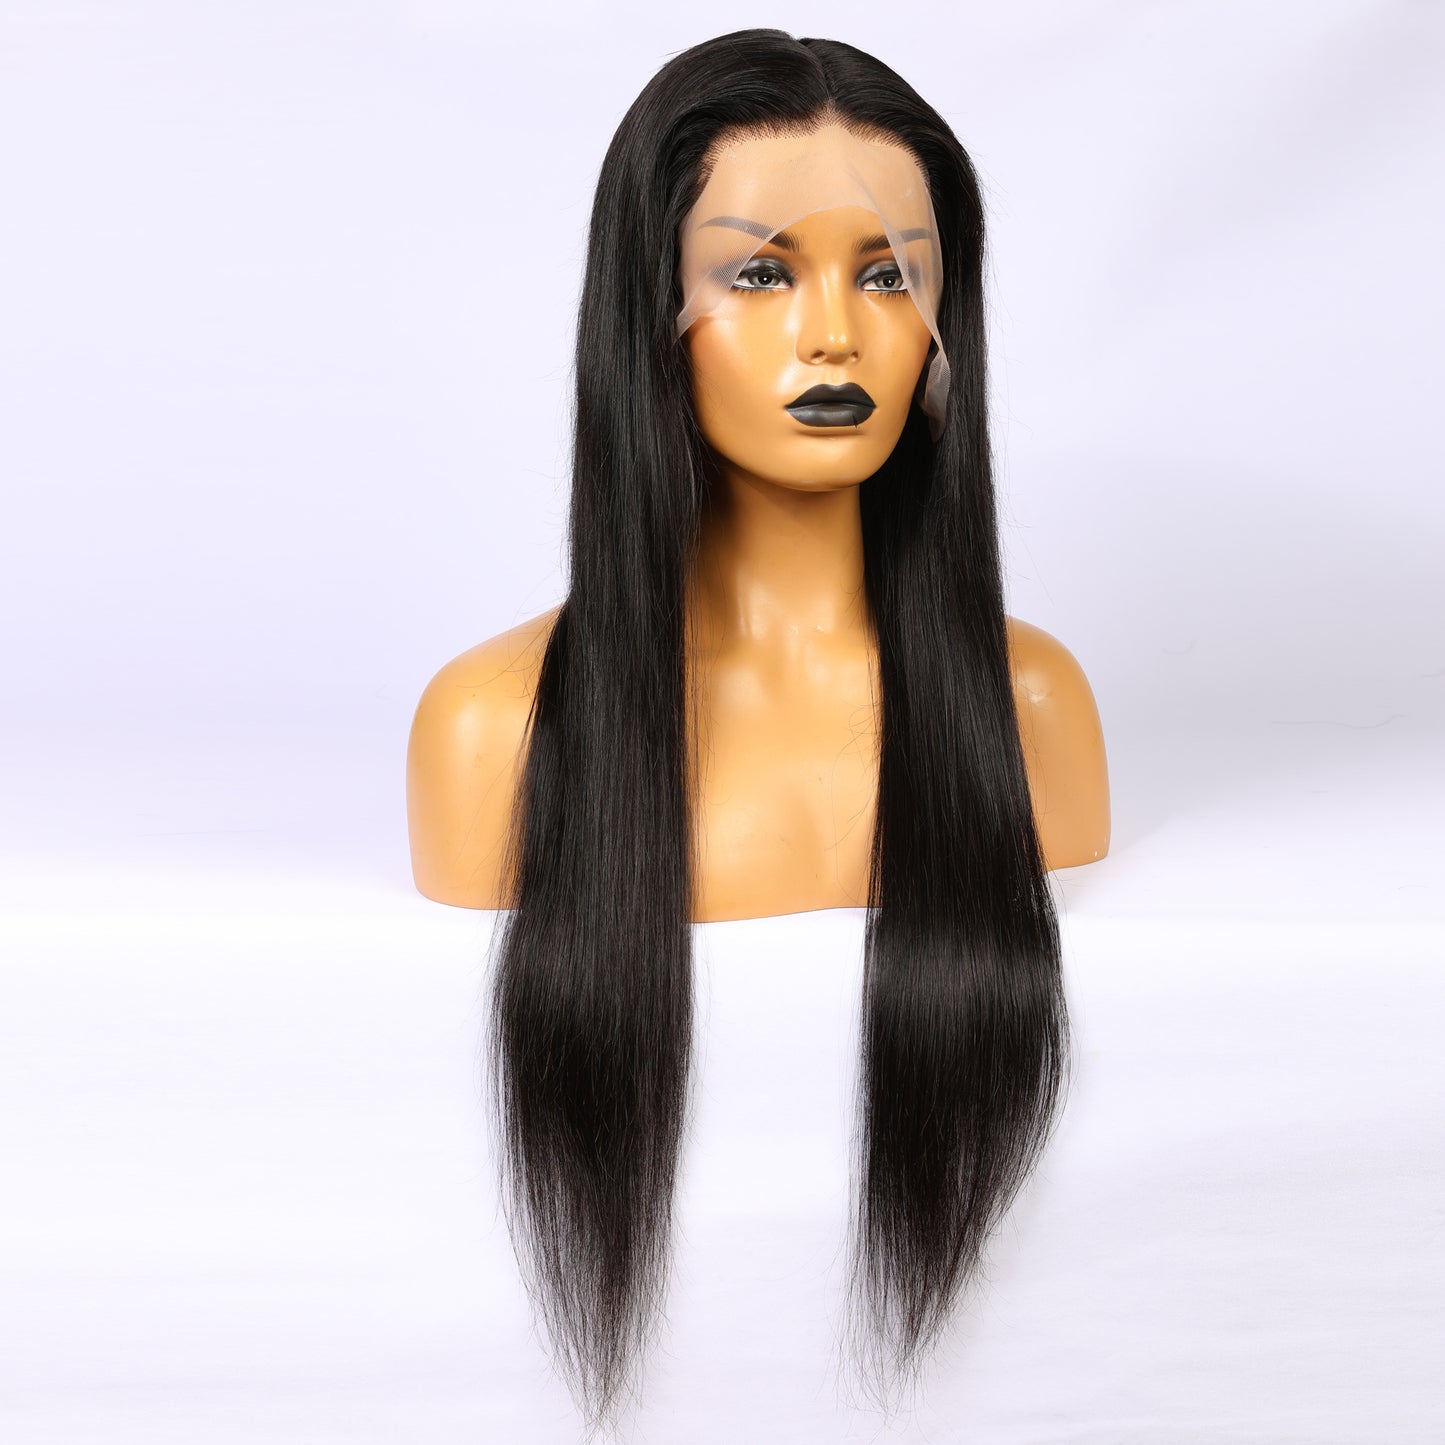 Real Human Hair Wigs Black Color